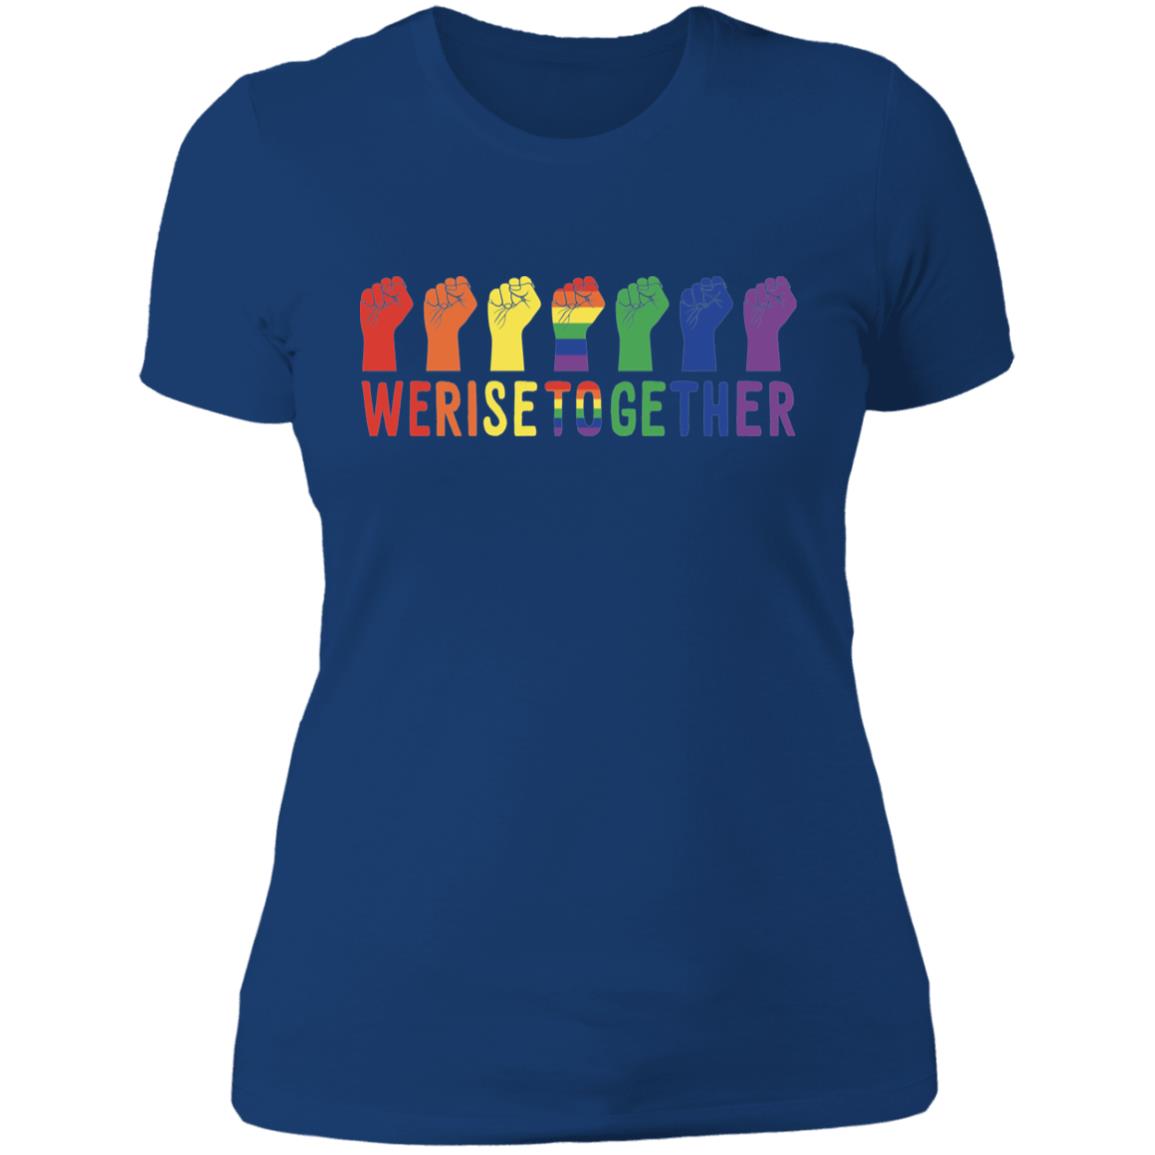 We Rise Together T-Shirt & Hoodie